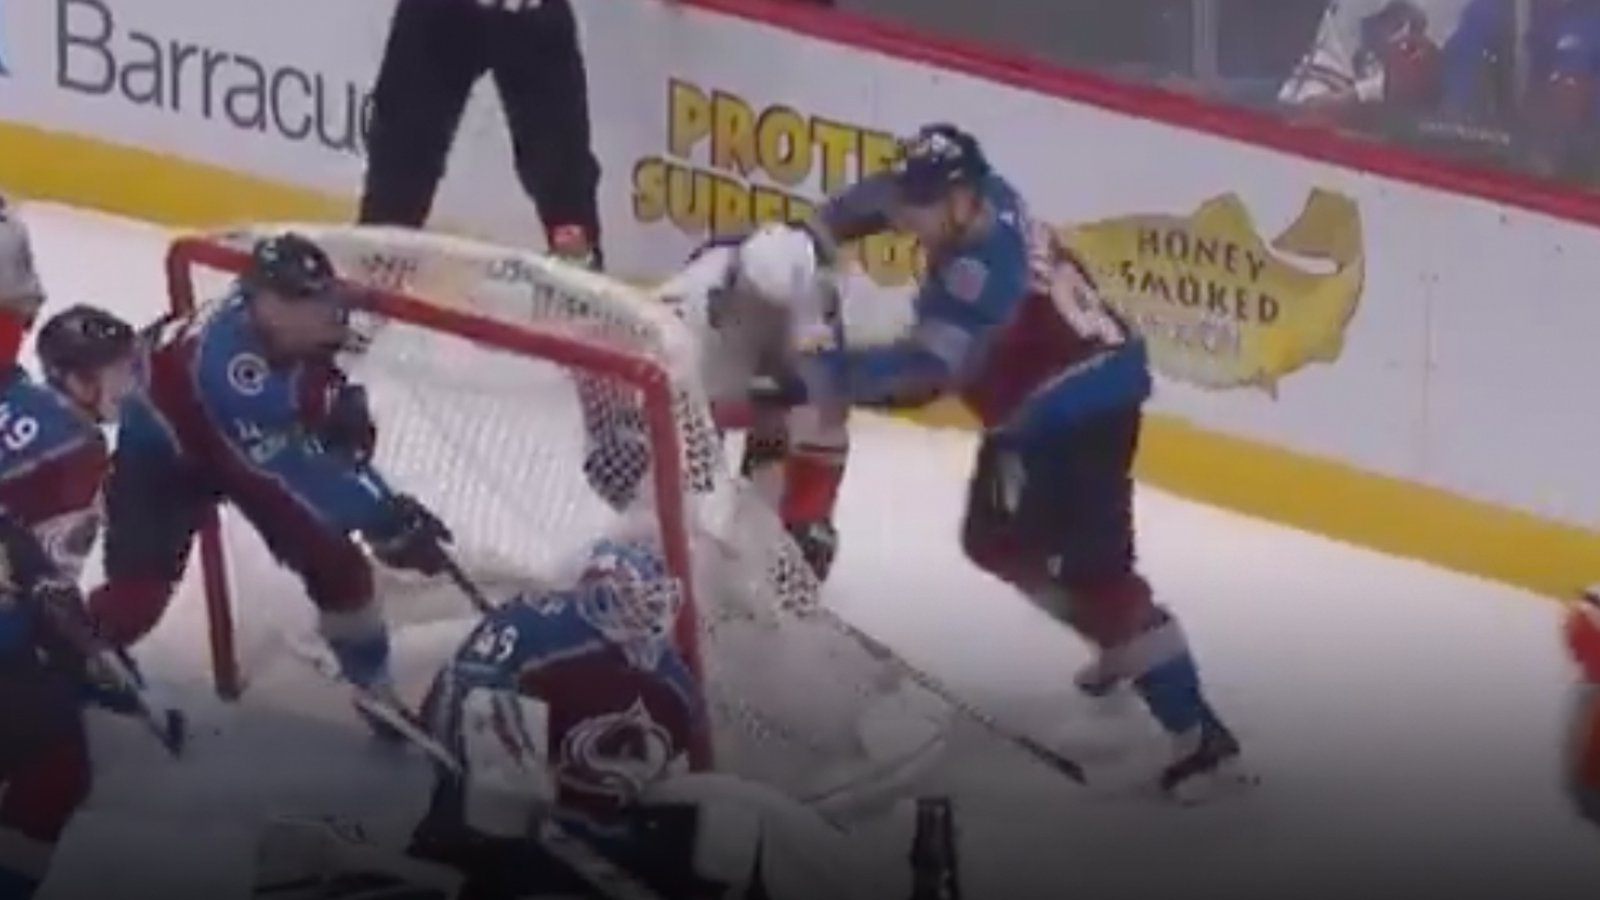 Breaking: Landeskog facing suspension for nasty cross-check to the head